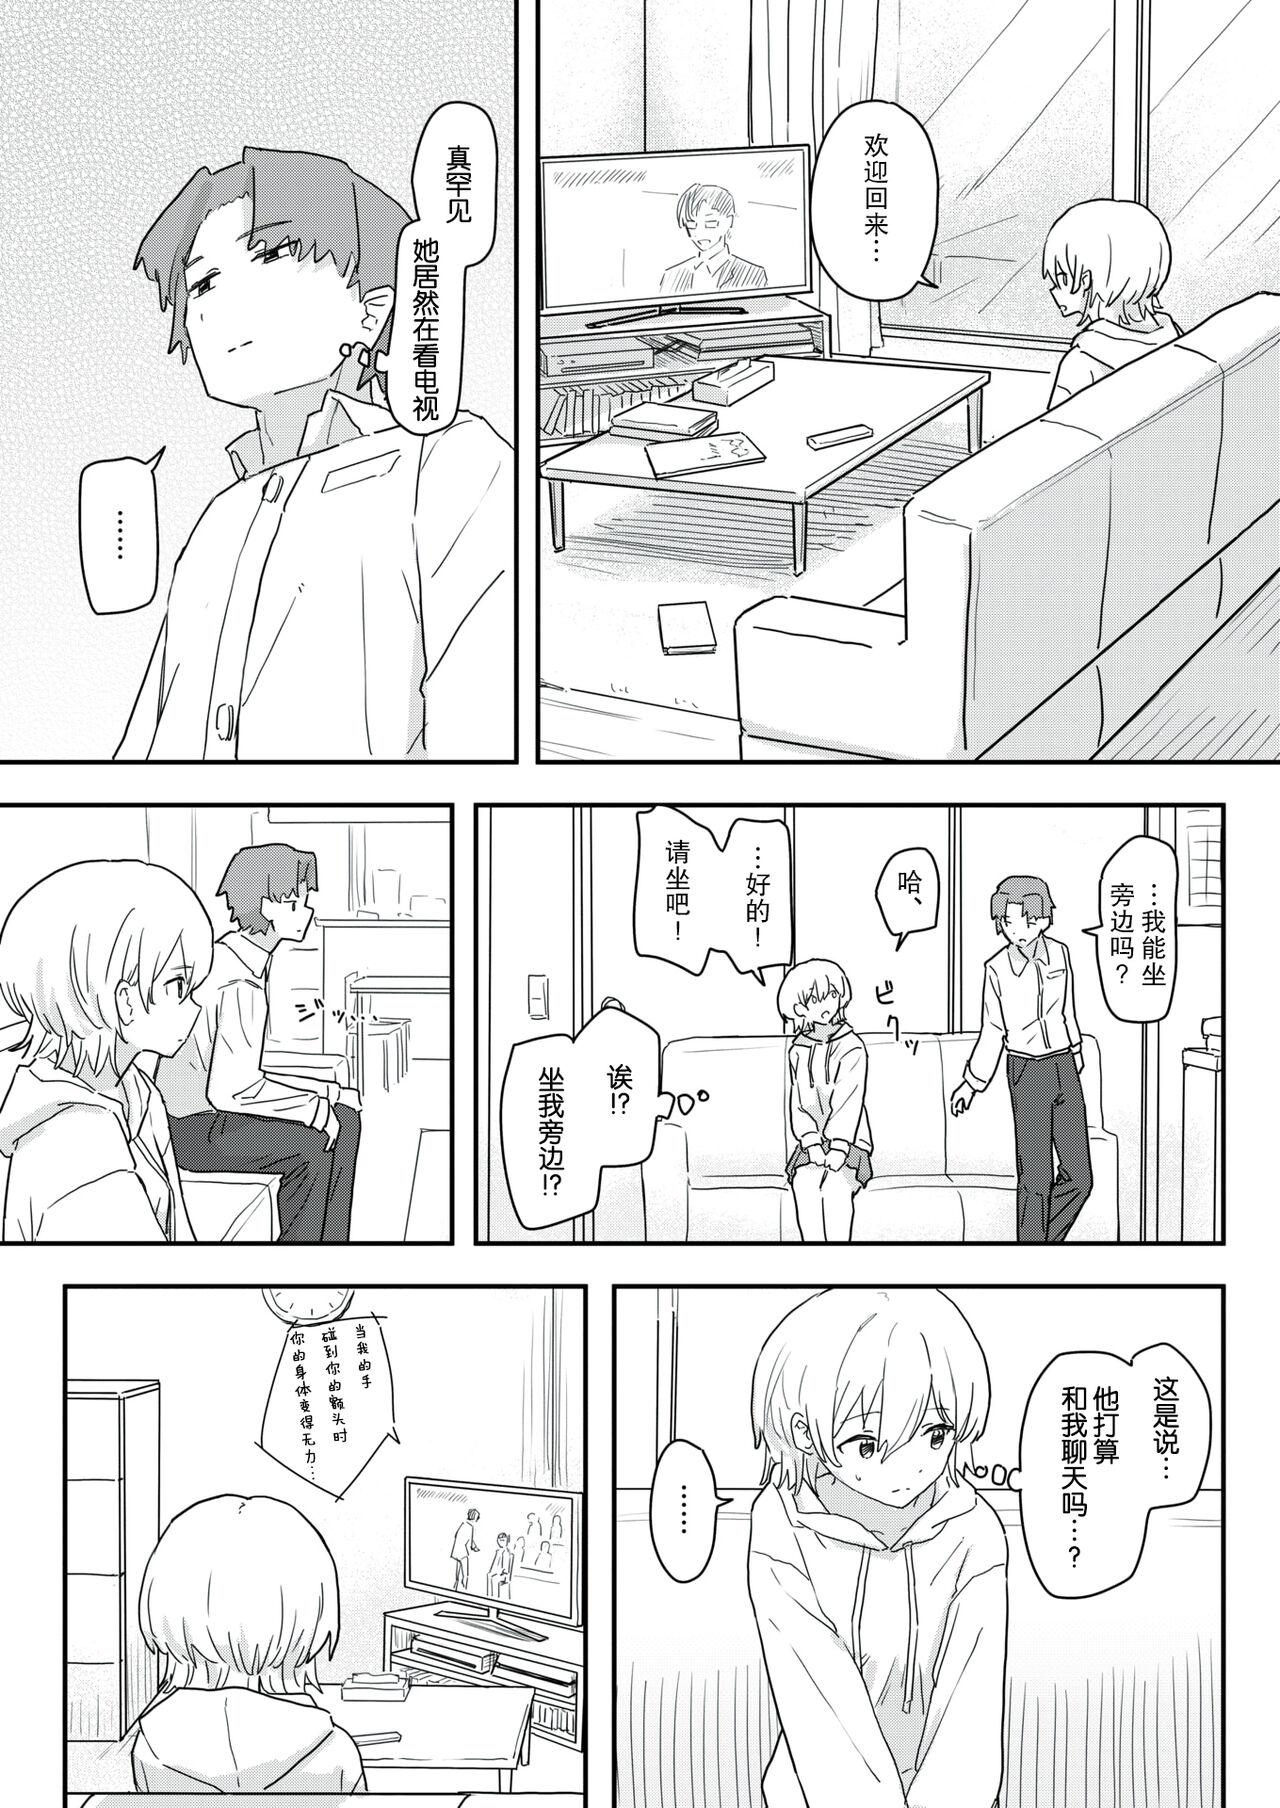 Daring 同居生活異常アリ 前編 Old Young - Page 8